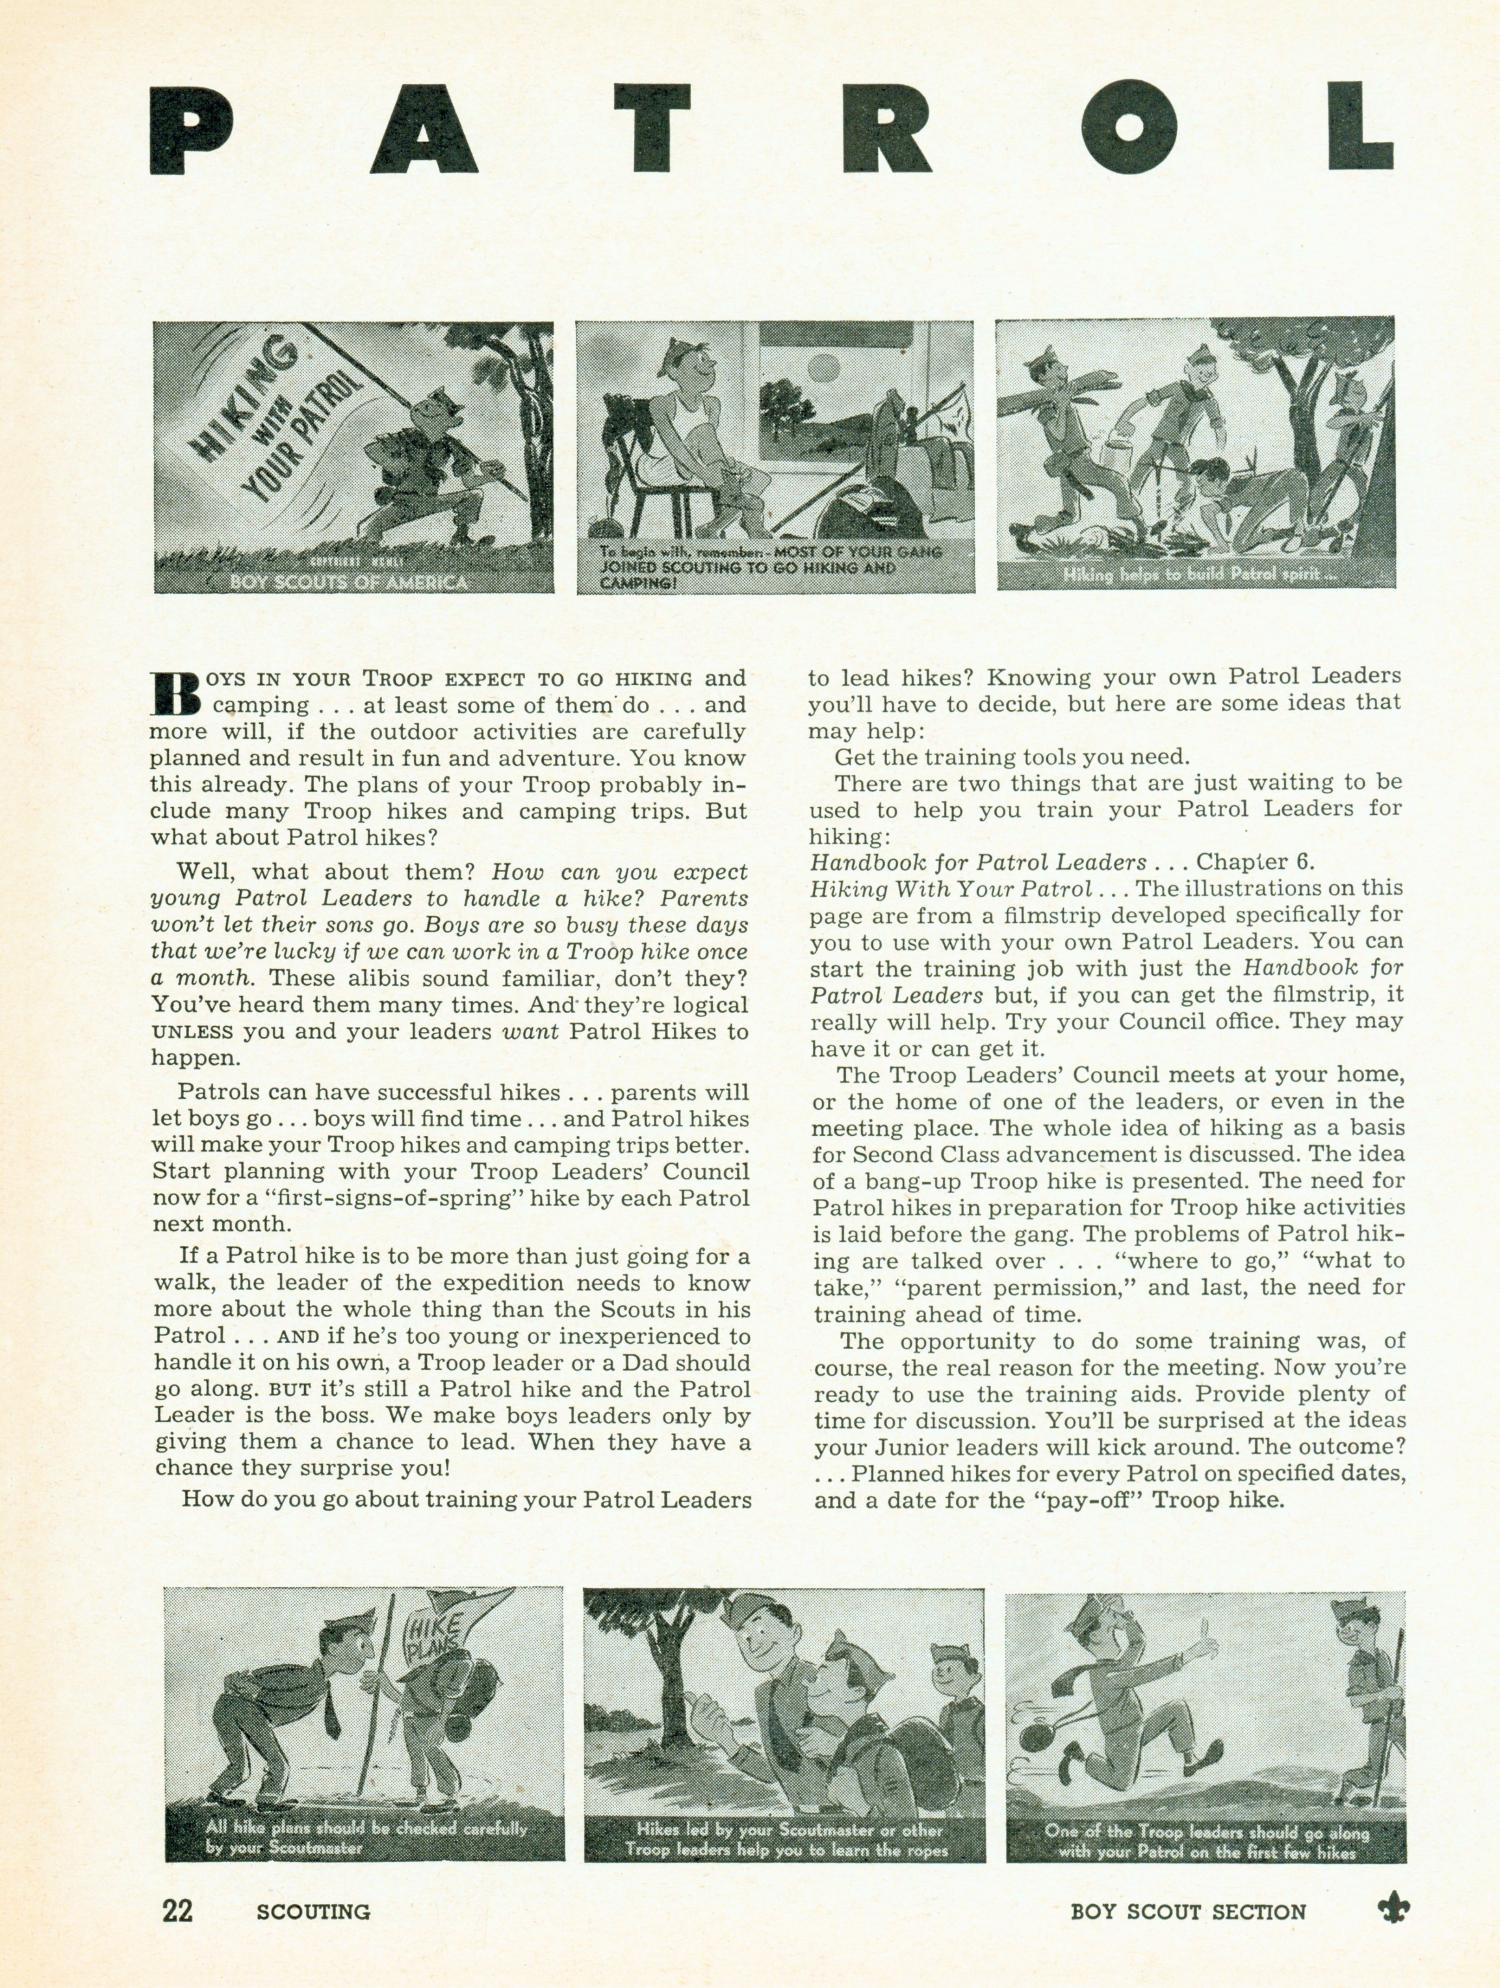 Scouting, Volume 40, Number 2, February 1952
                                                
                                                    22
                                                